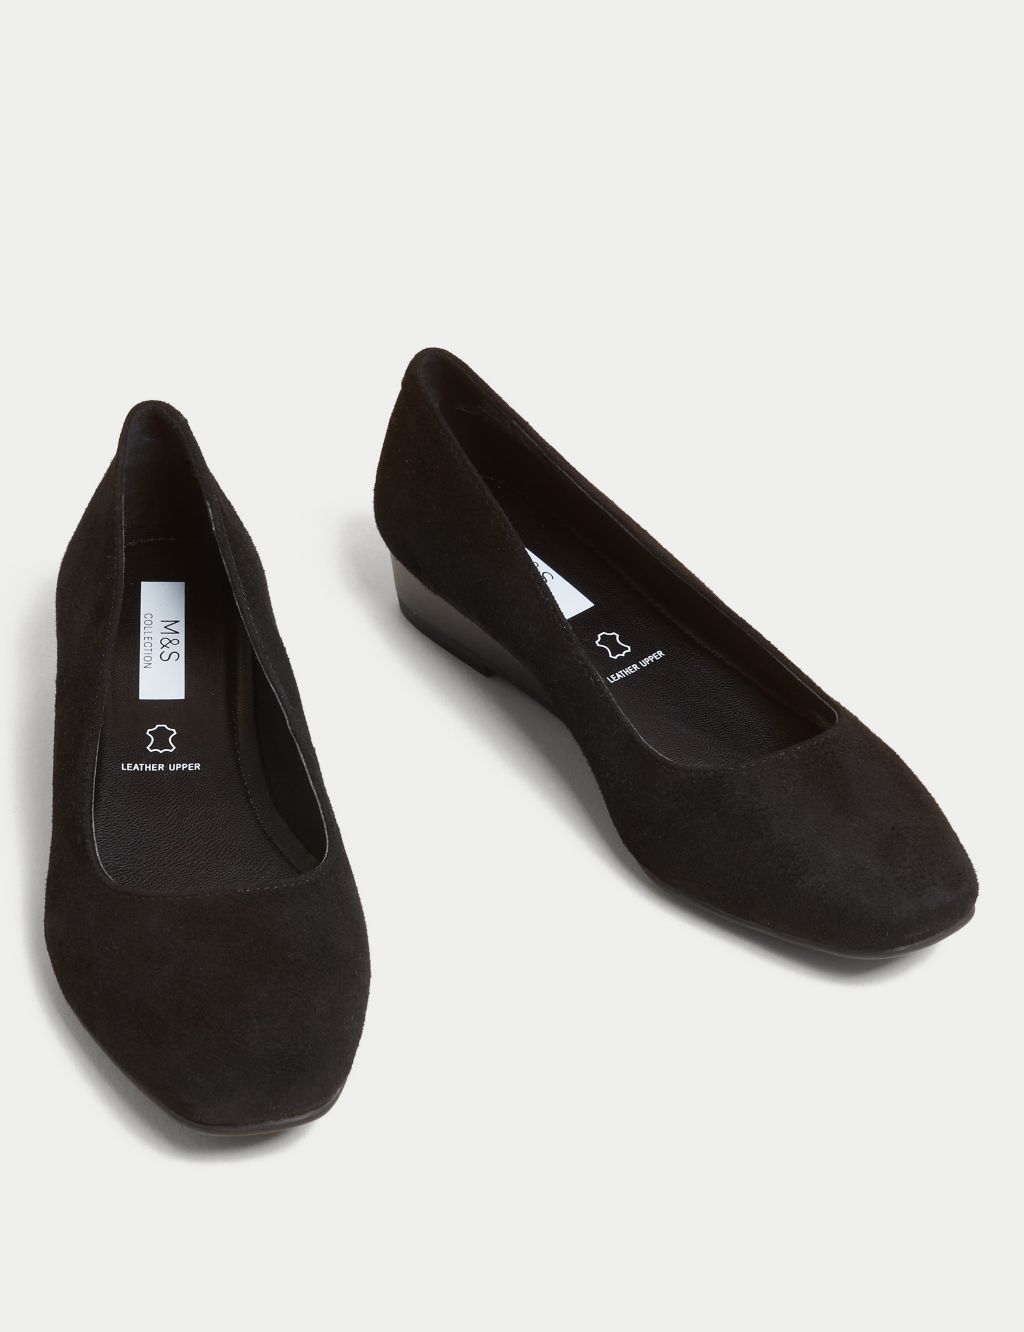 Buy Suede Wedge Pumps | M&S Collection | M&S